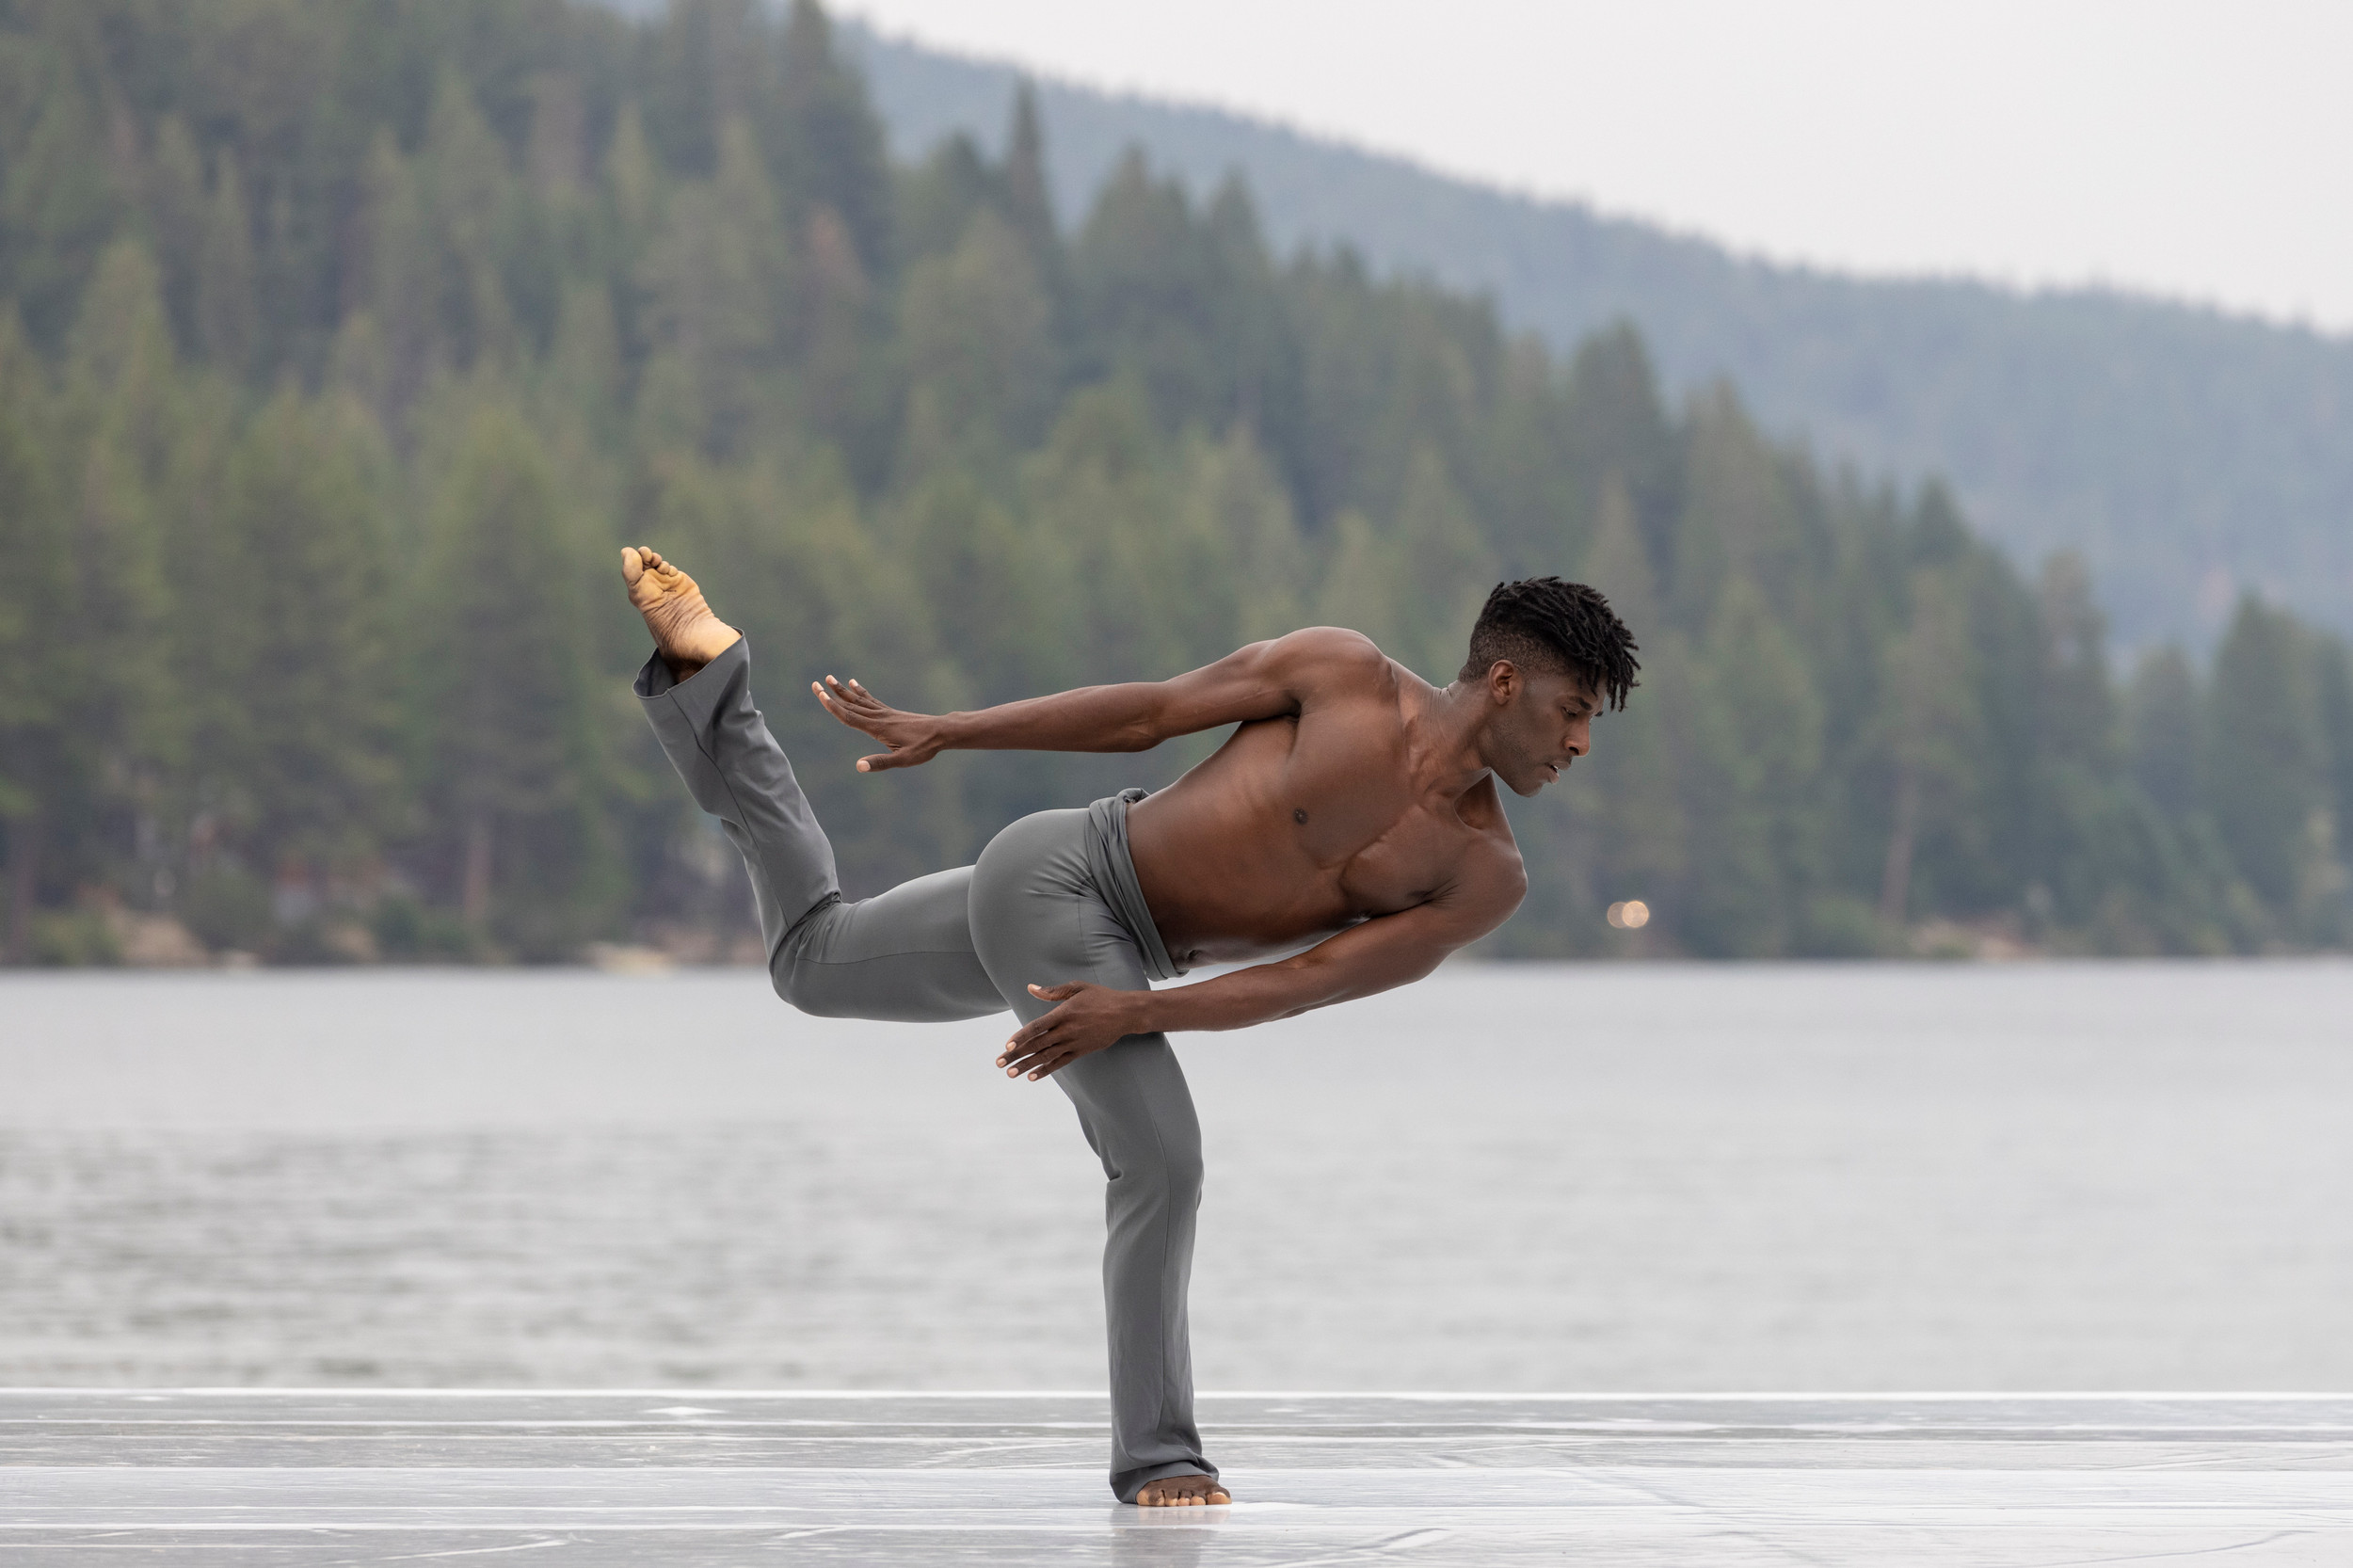 Tenth Annual Lake Tahoe Dance Festival: A Mesmerizing Showcase of Artistry and Movement! 18